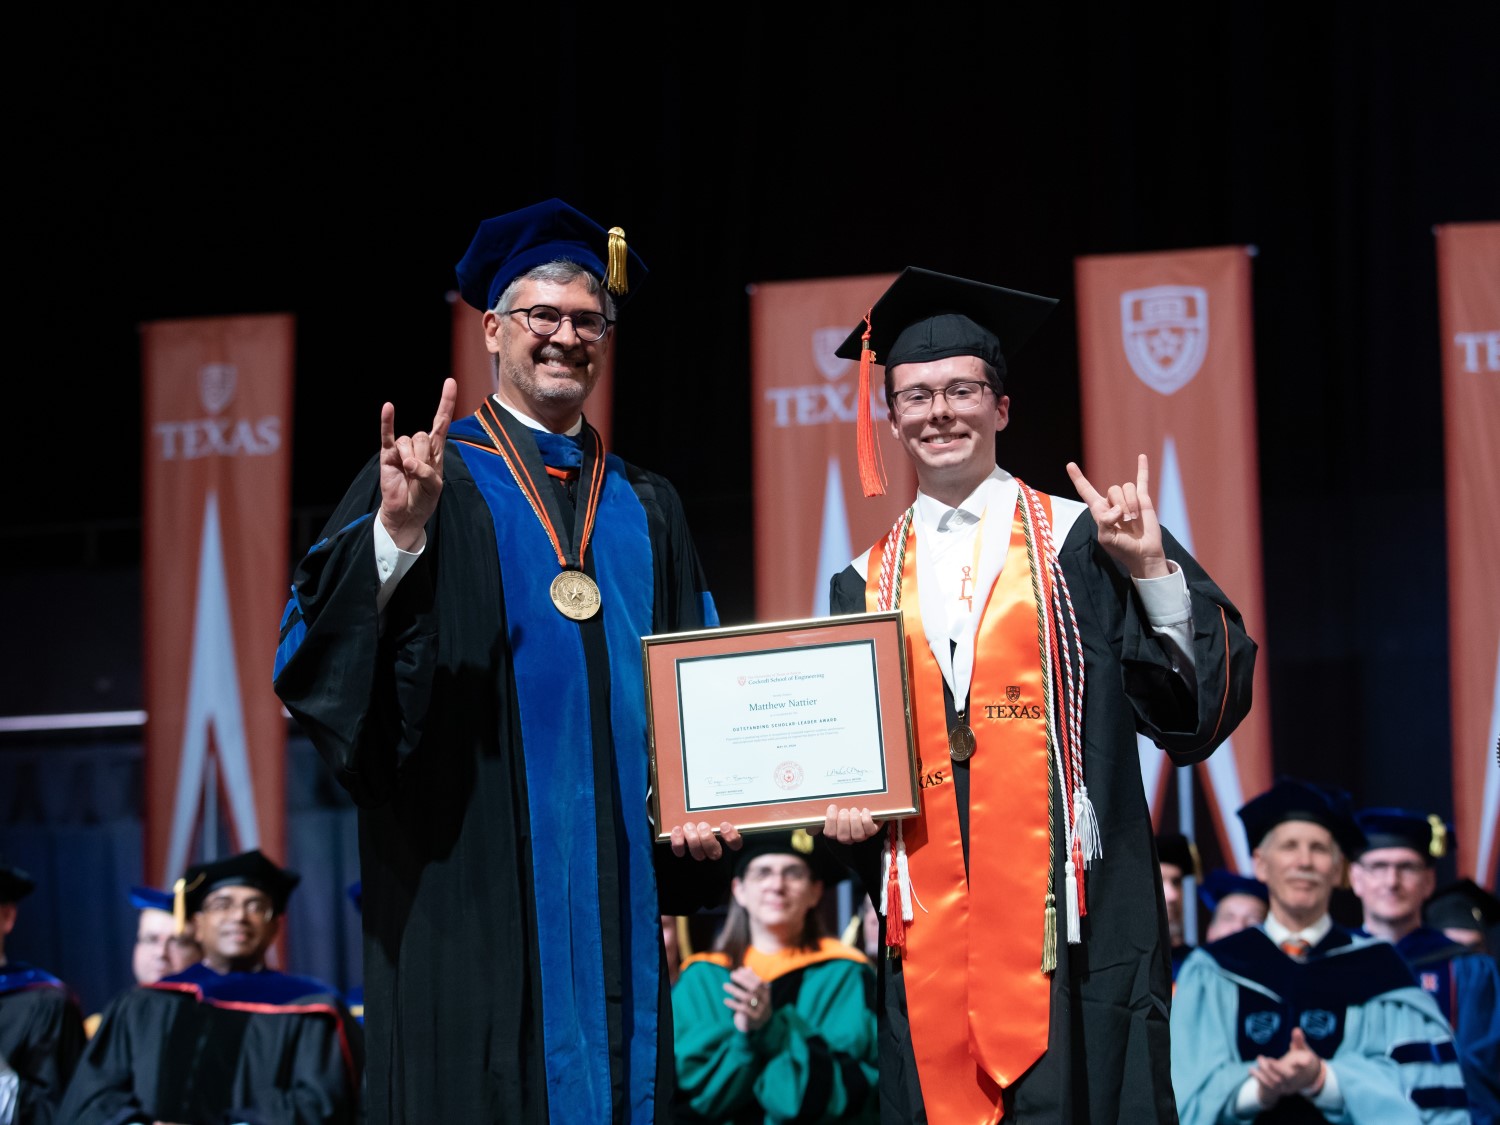 Texas engineering student Matthew Nattier at Cockrell's Commencement ceremony